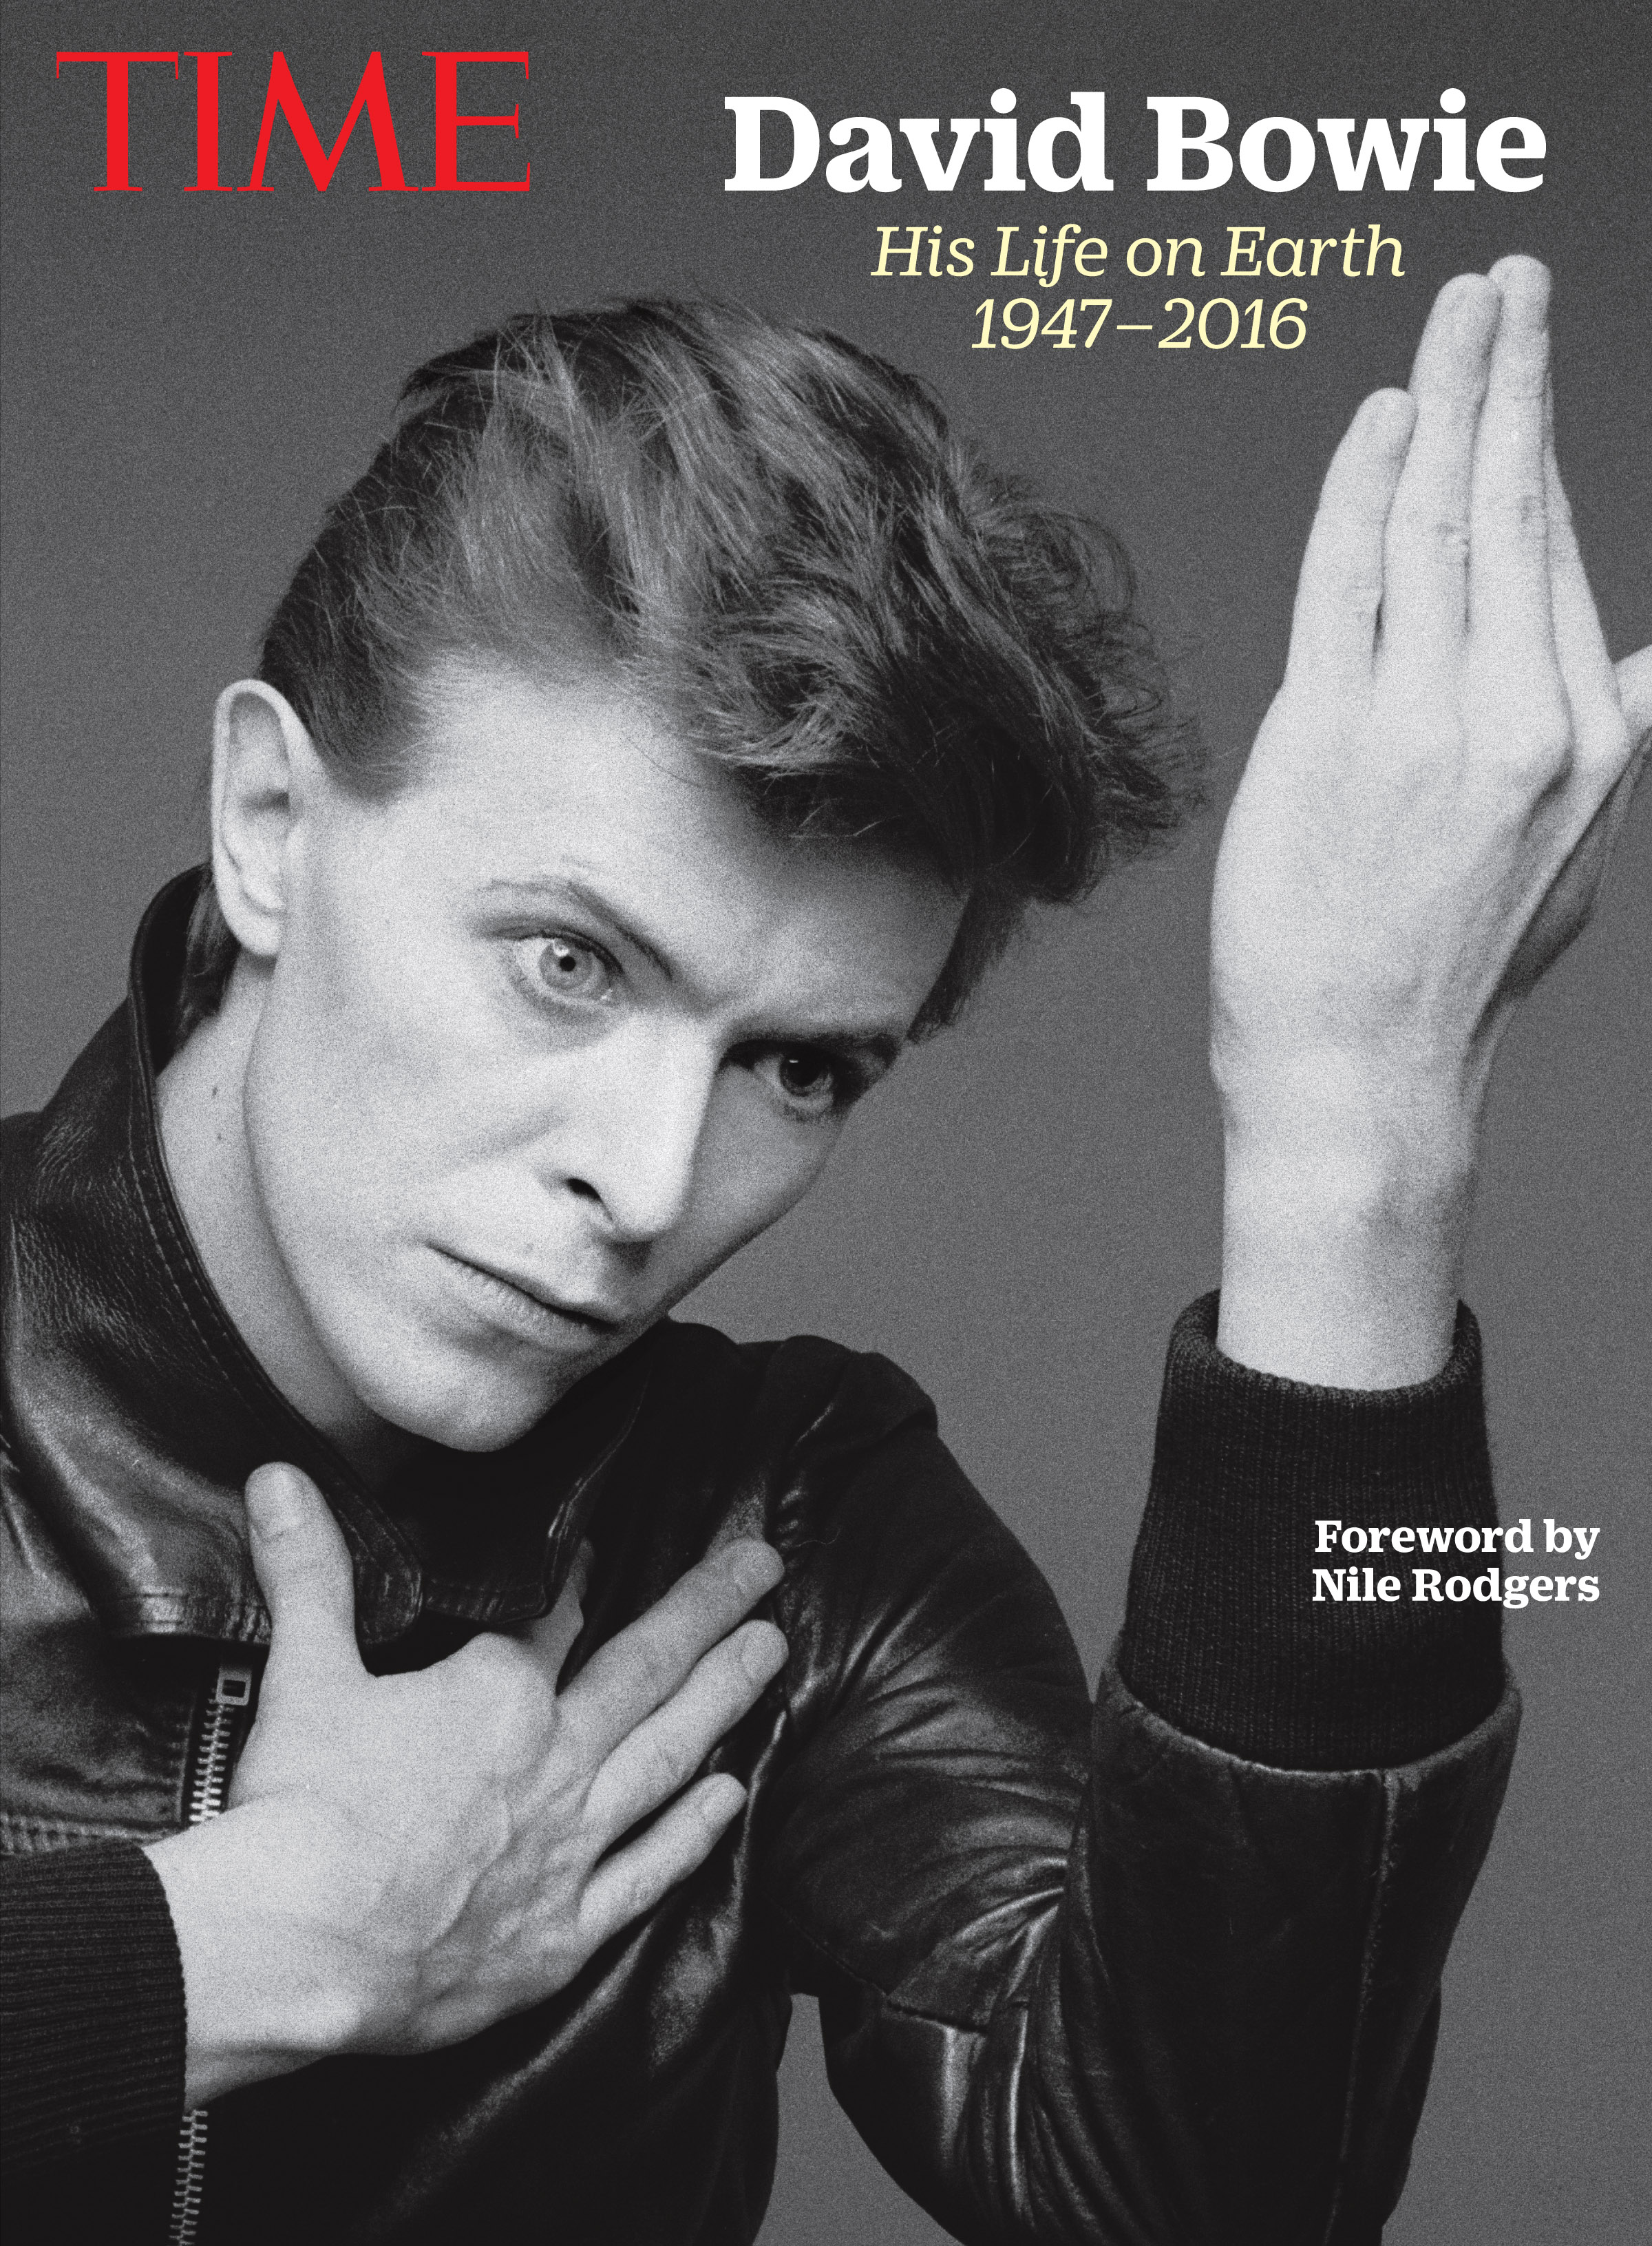 David Bowie: His Life on Earth. (Time Books)